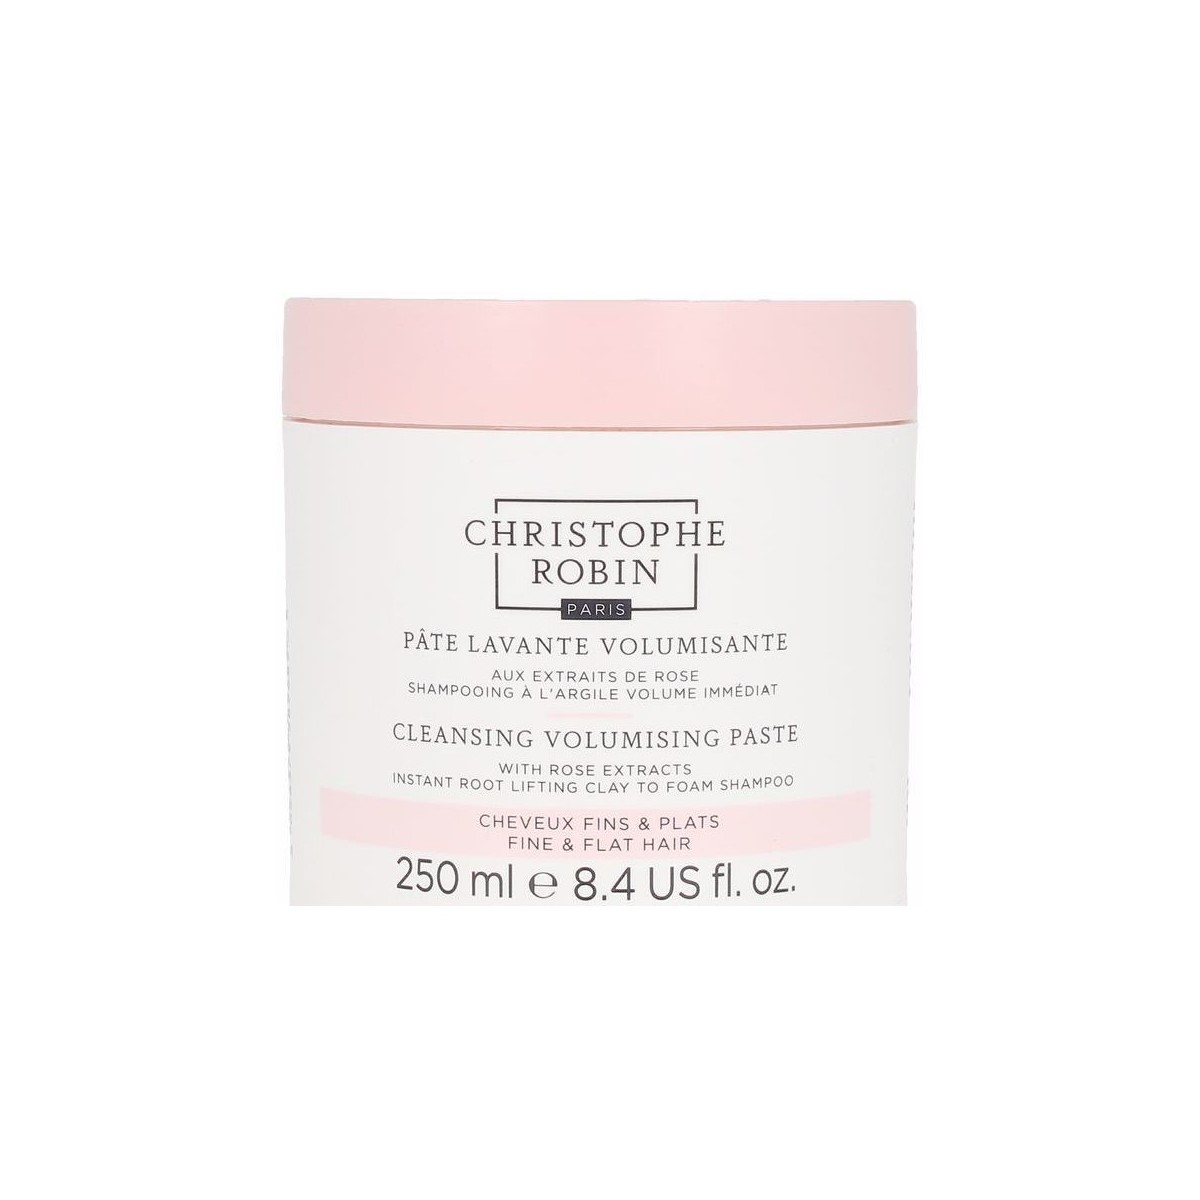 Beauty Shampoo Christophe Robin Cleansing Volumizing Paste With Pure Rassoul Clay&rose Extracts 